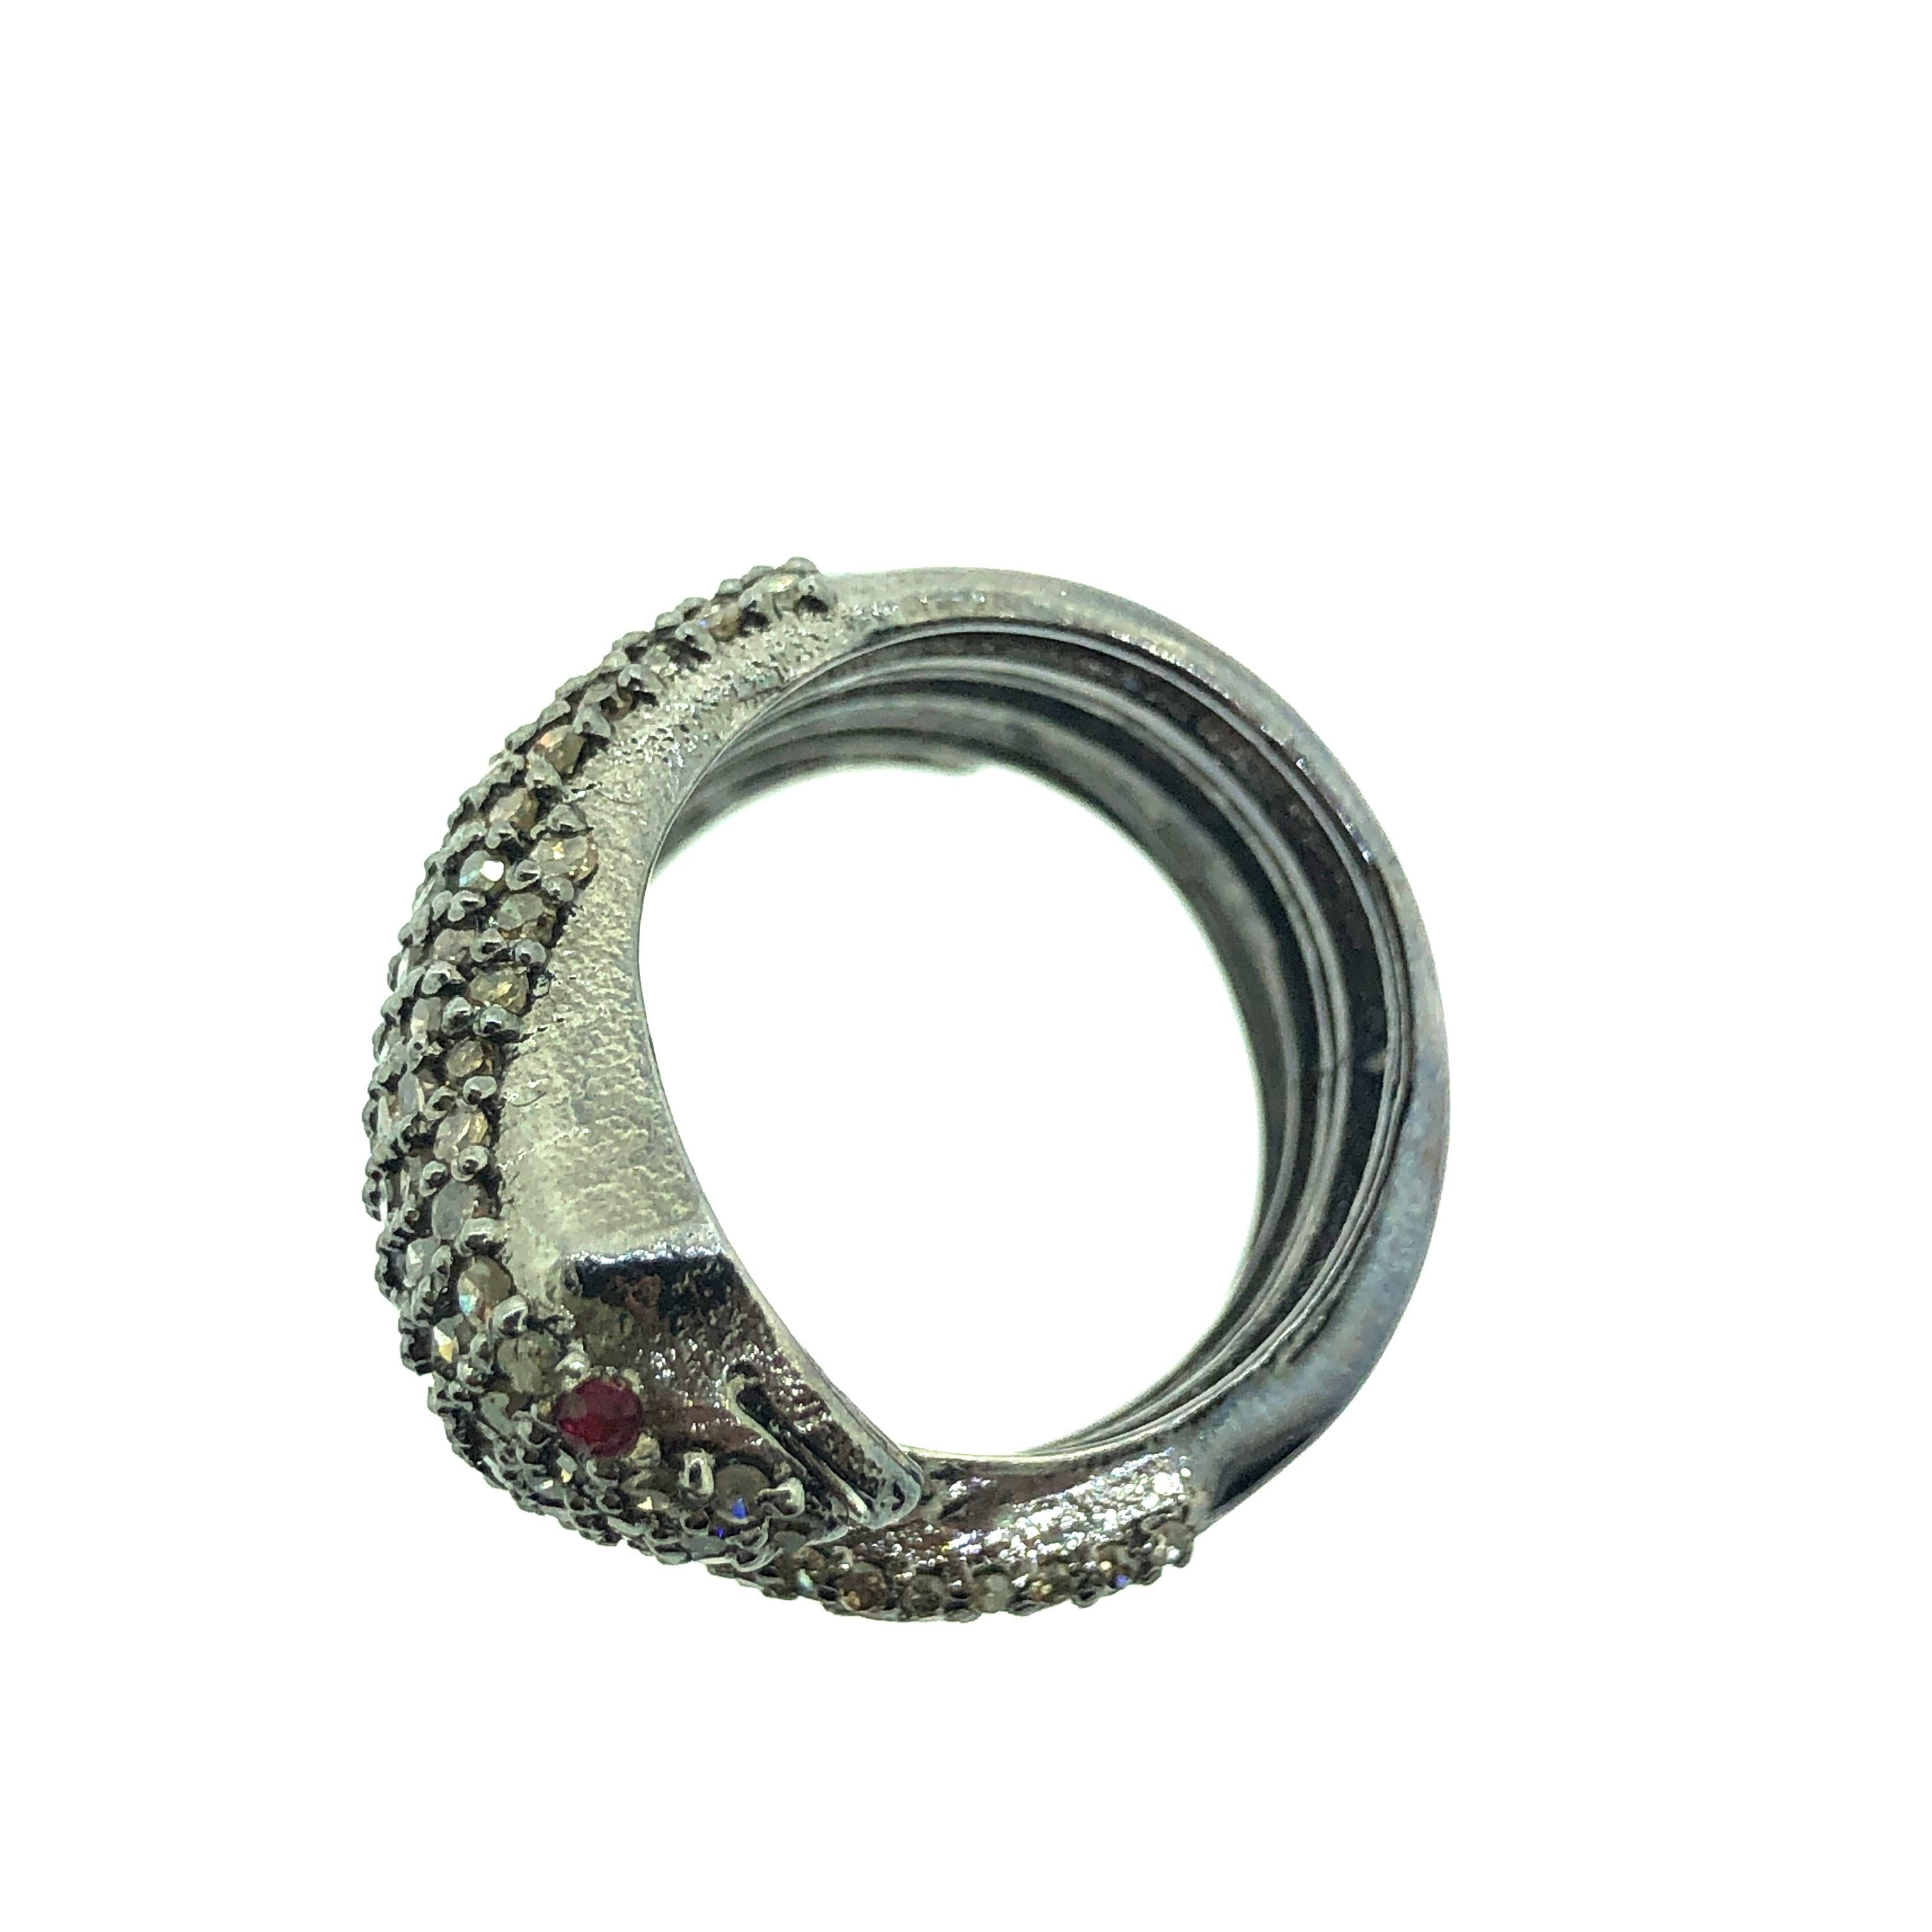 Contemporary 2.88 Carat Diamond and Ruby Eyes Snake Ring in Oxidized Sterling Silver For Sale